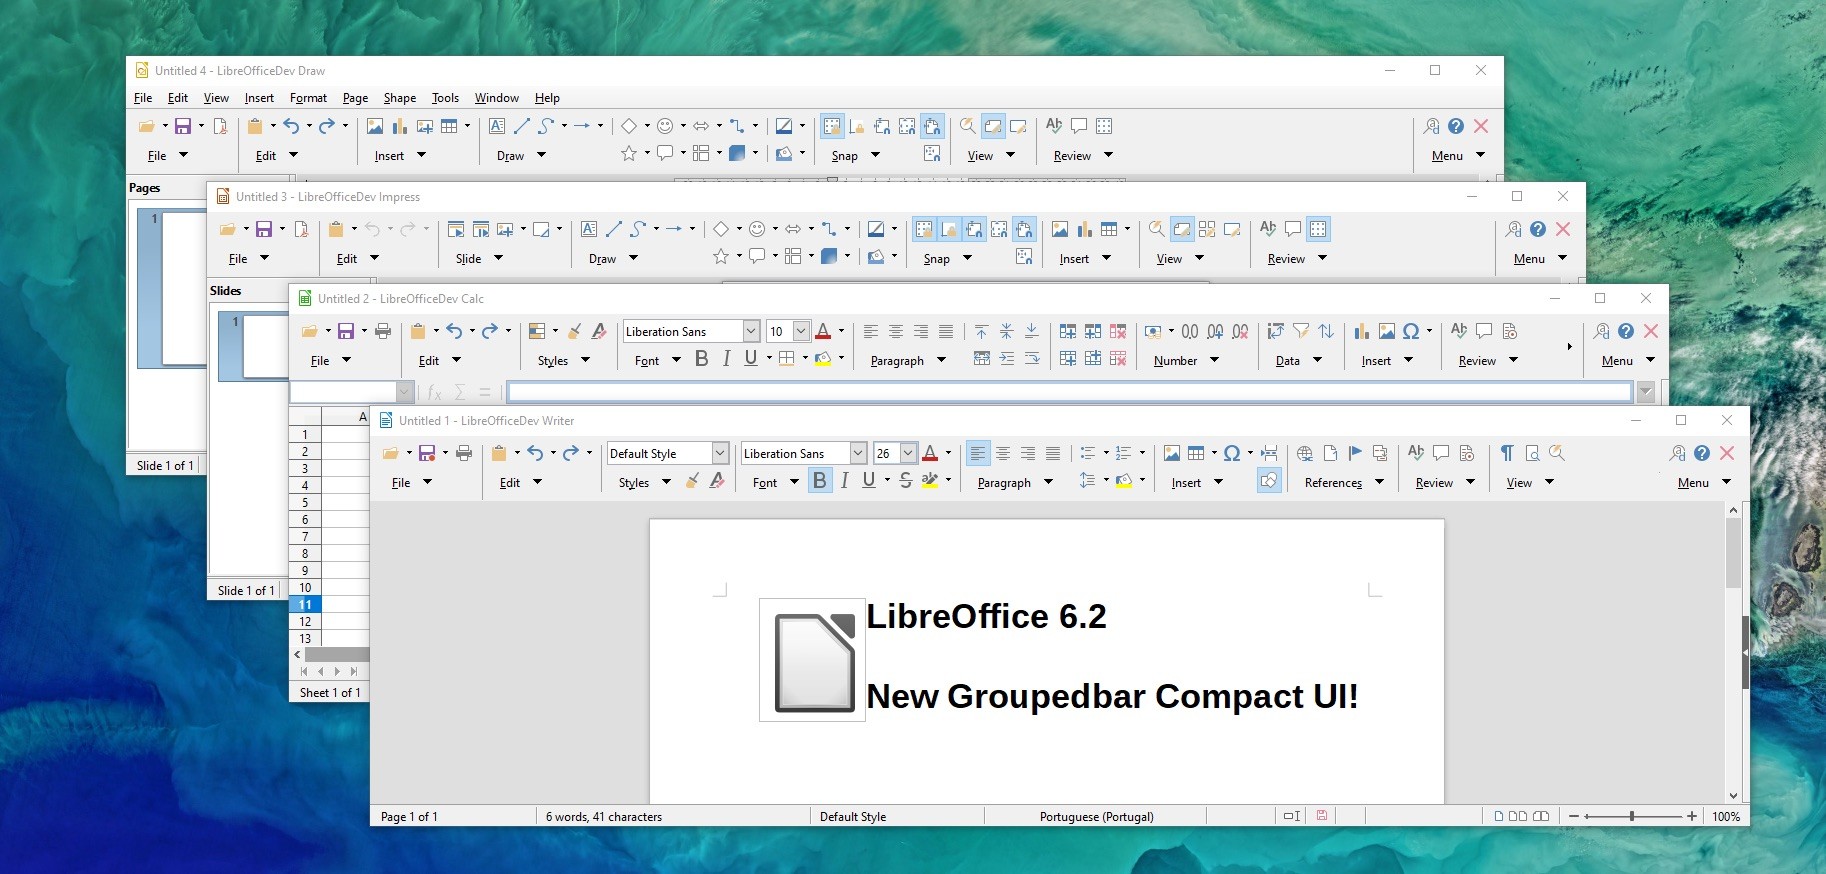 libreoffice-6-2-officially-released-with